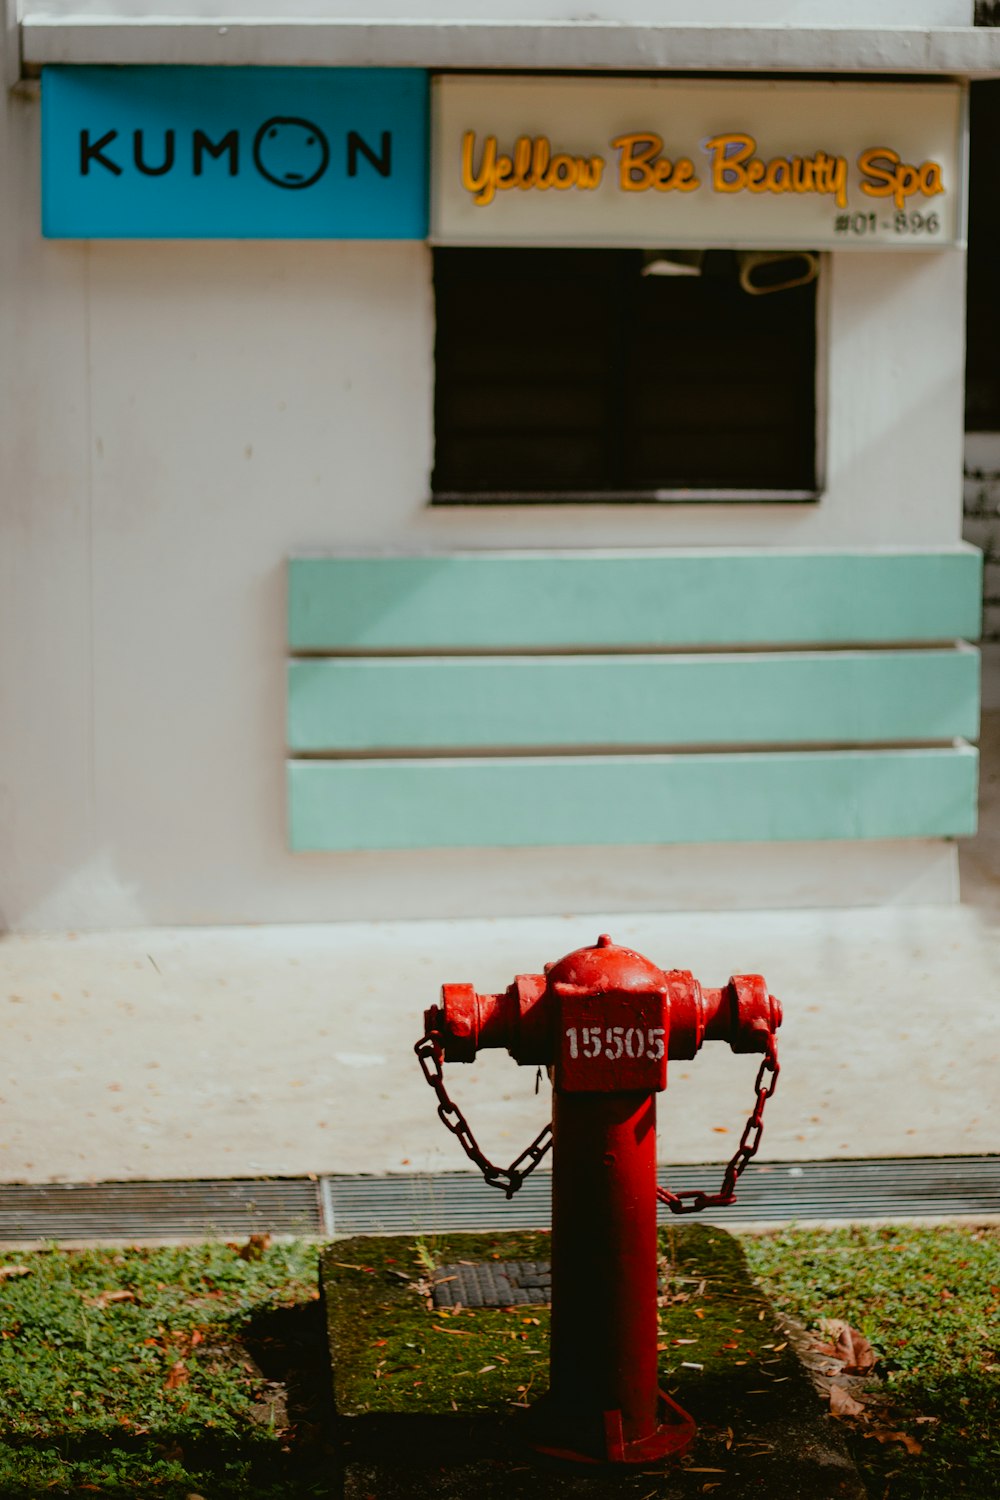 a red fire hydrant in front of a building